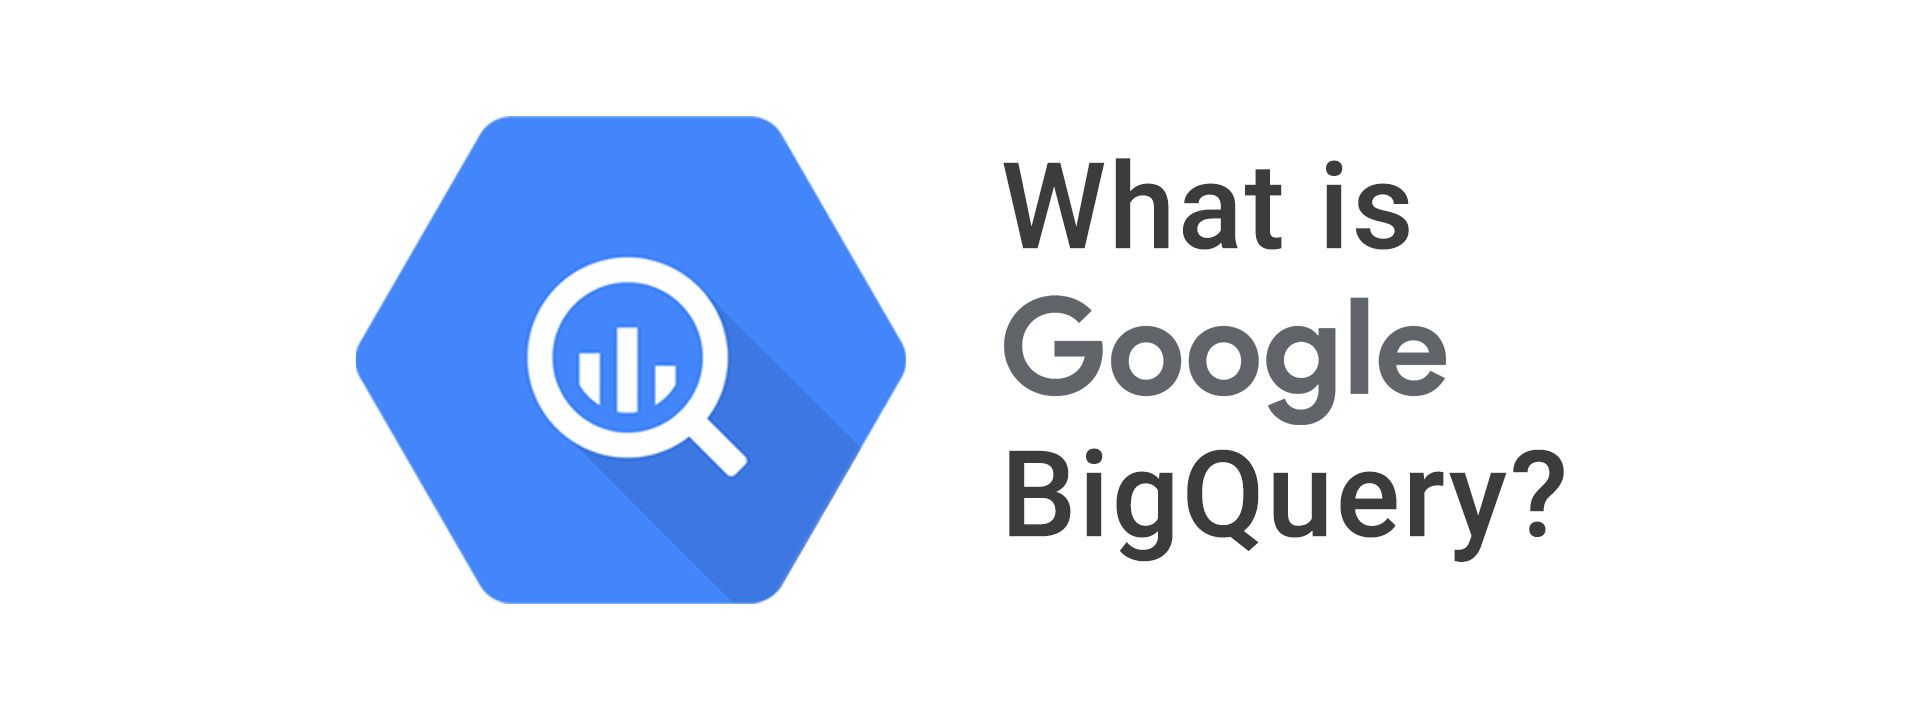 The words 'What is Google BigQuery' next to the Big query logo